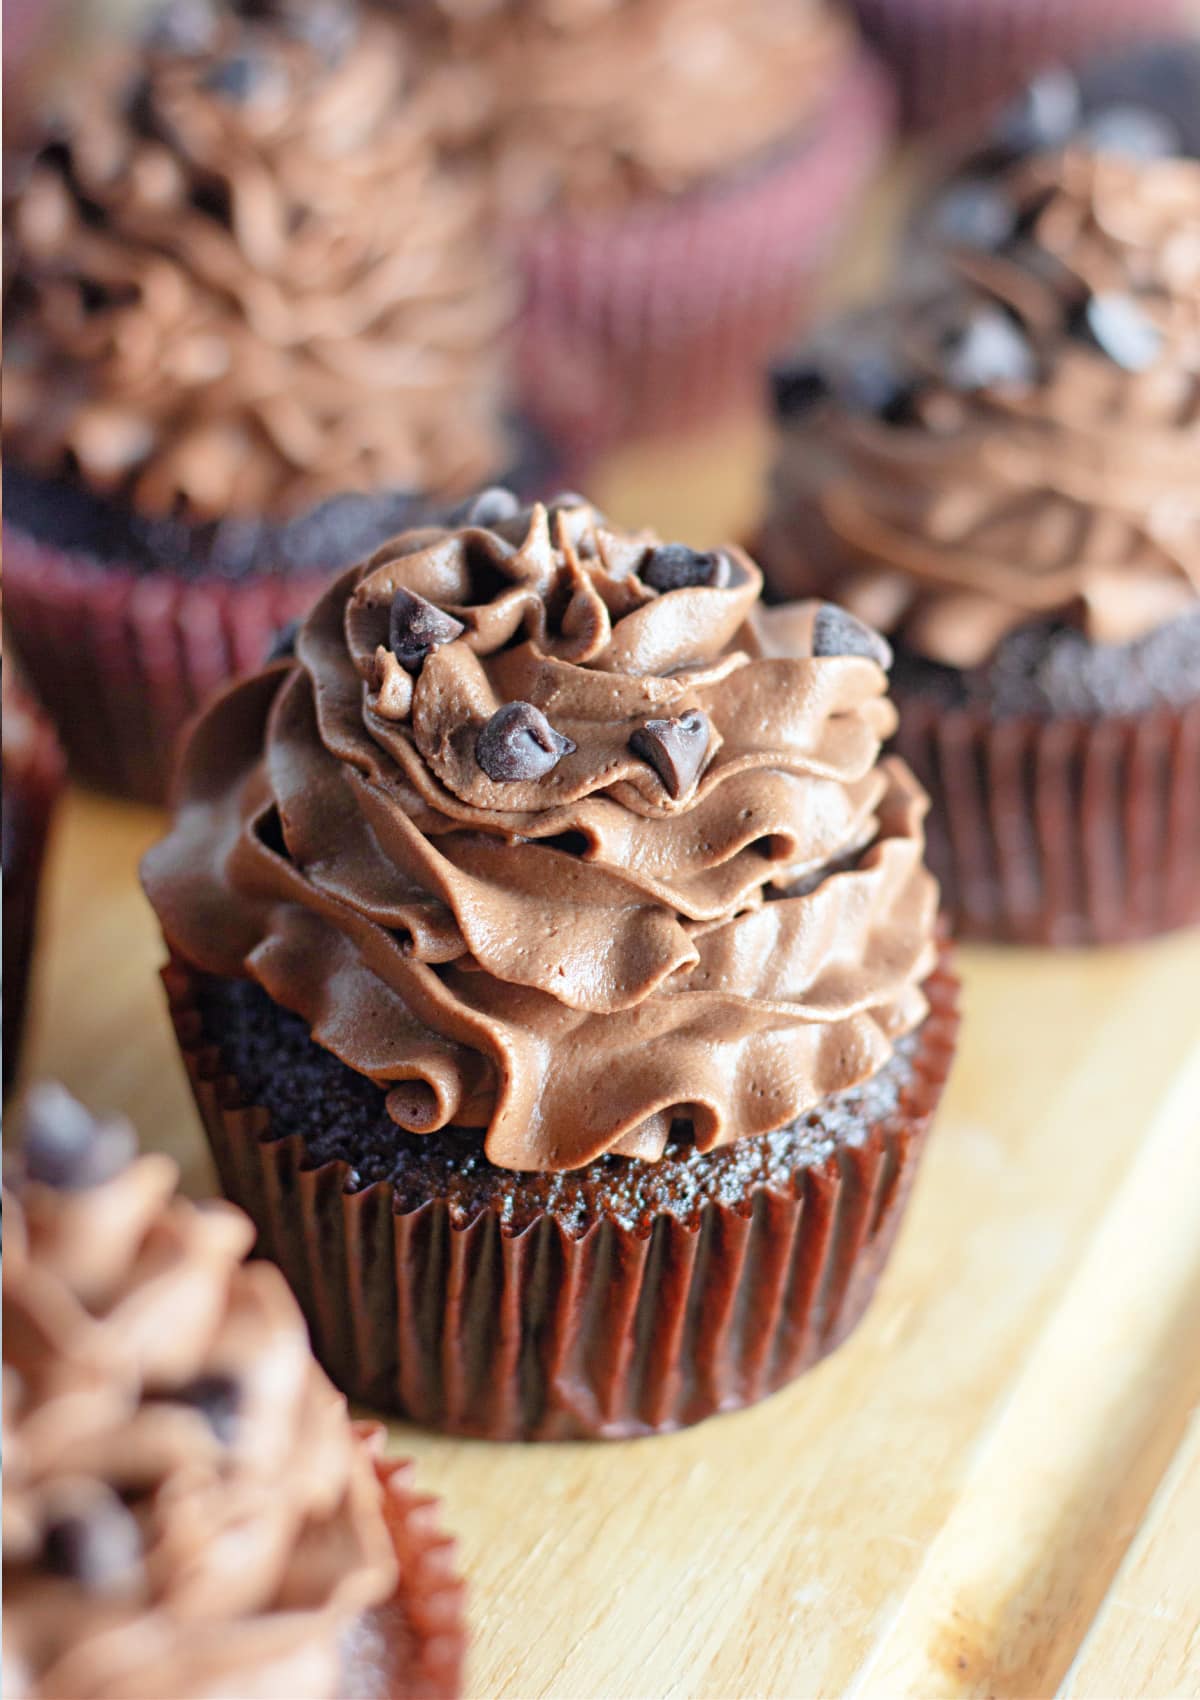 Tops of frosted chocolate cupcakes